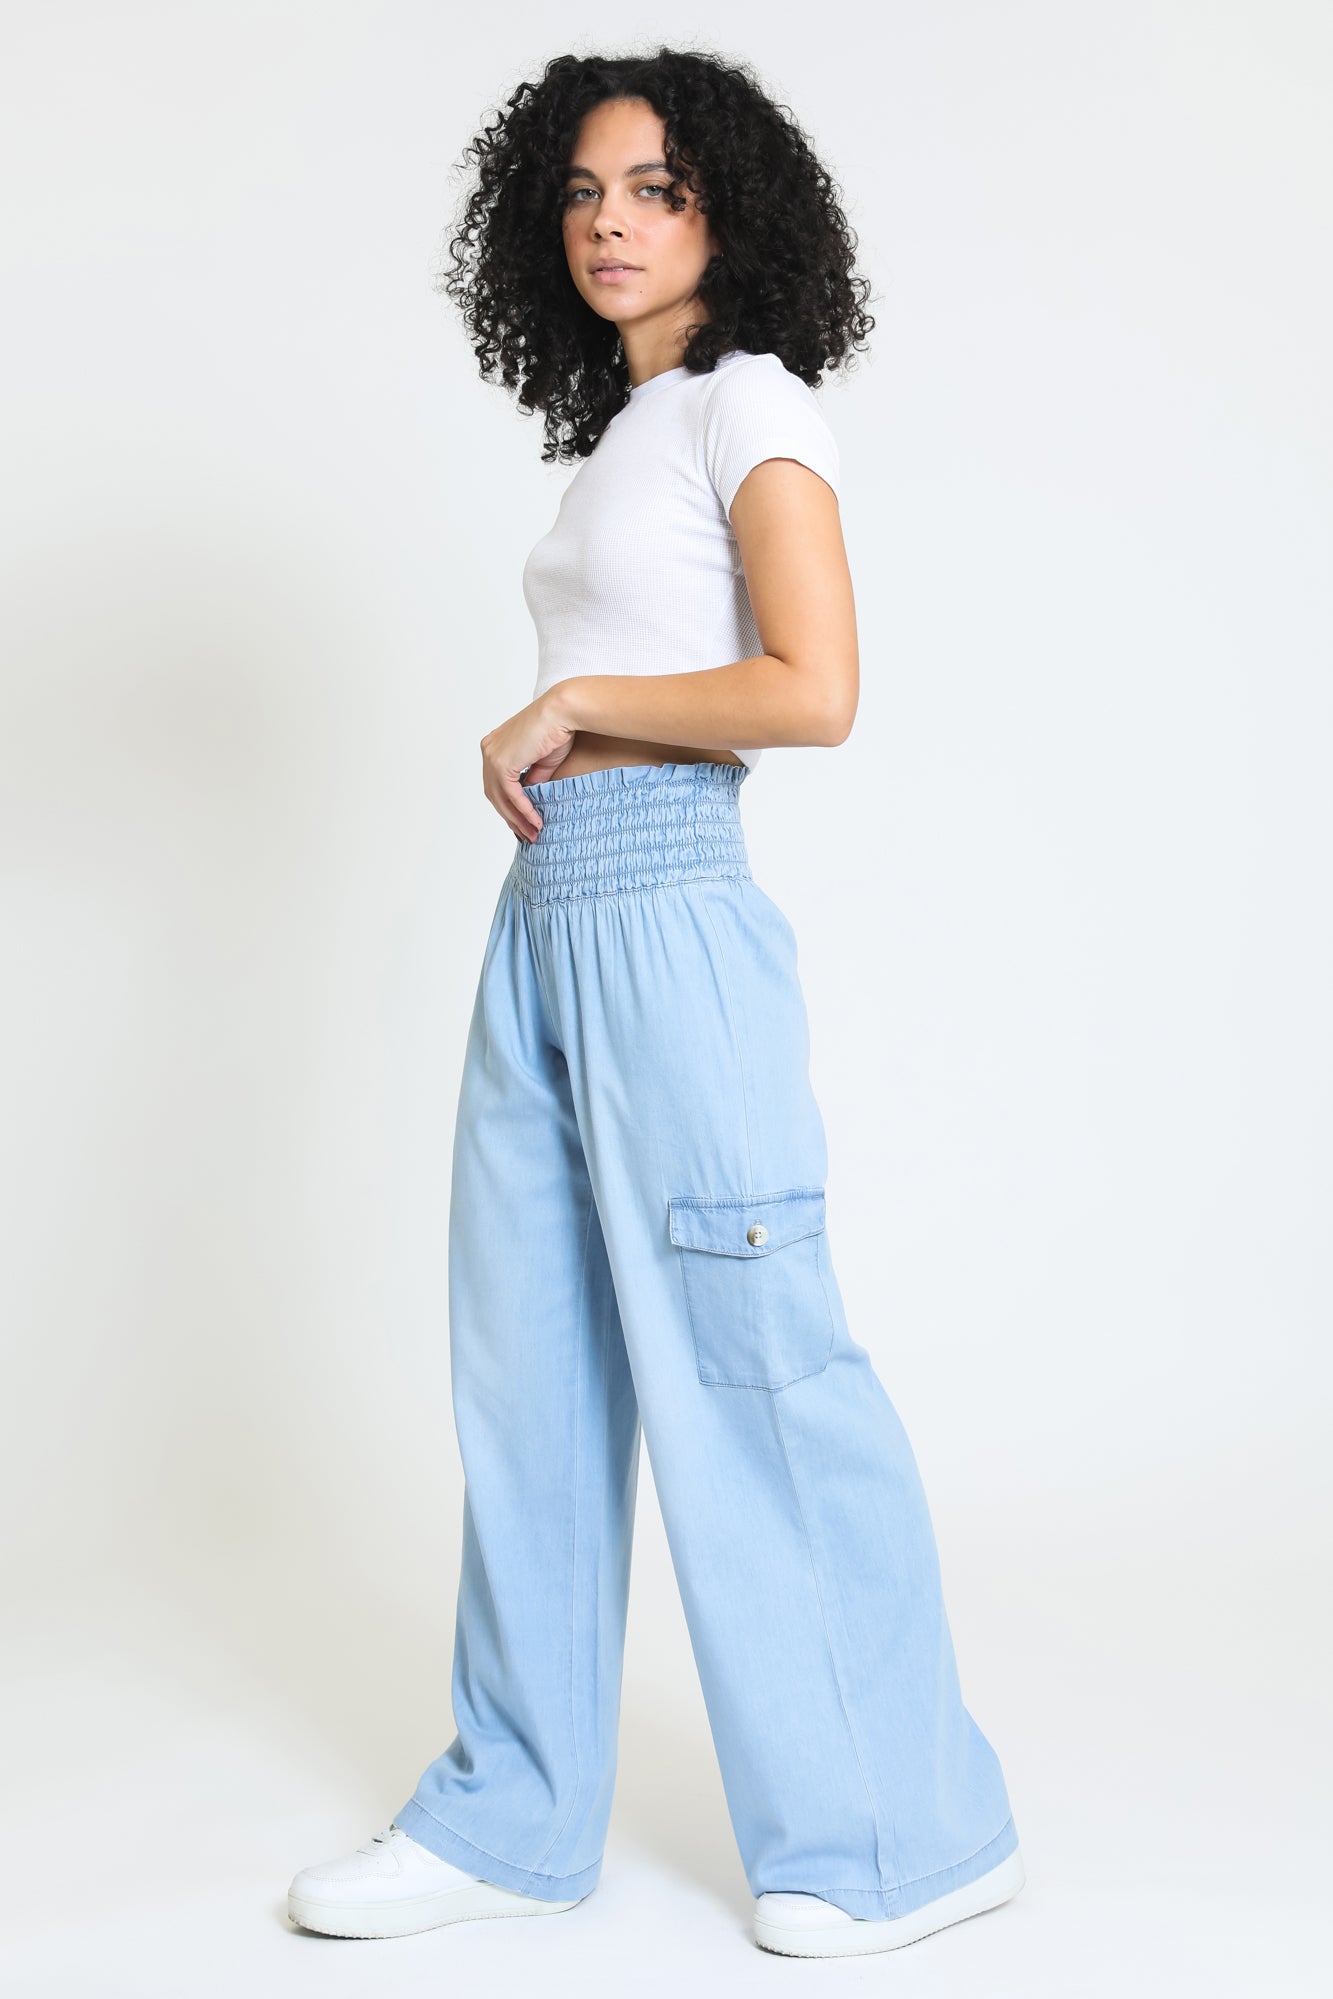 The Brown High Waisted Pleated Straight Pants - Women's High Waisted Pleated  Straight Leg Pants - Brown - Bottoms